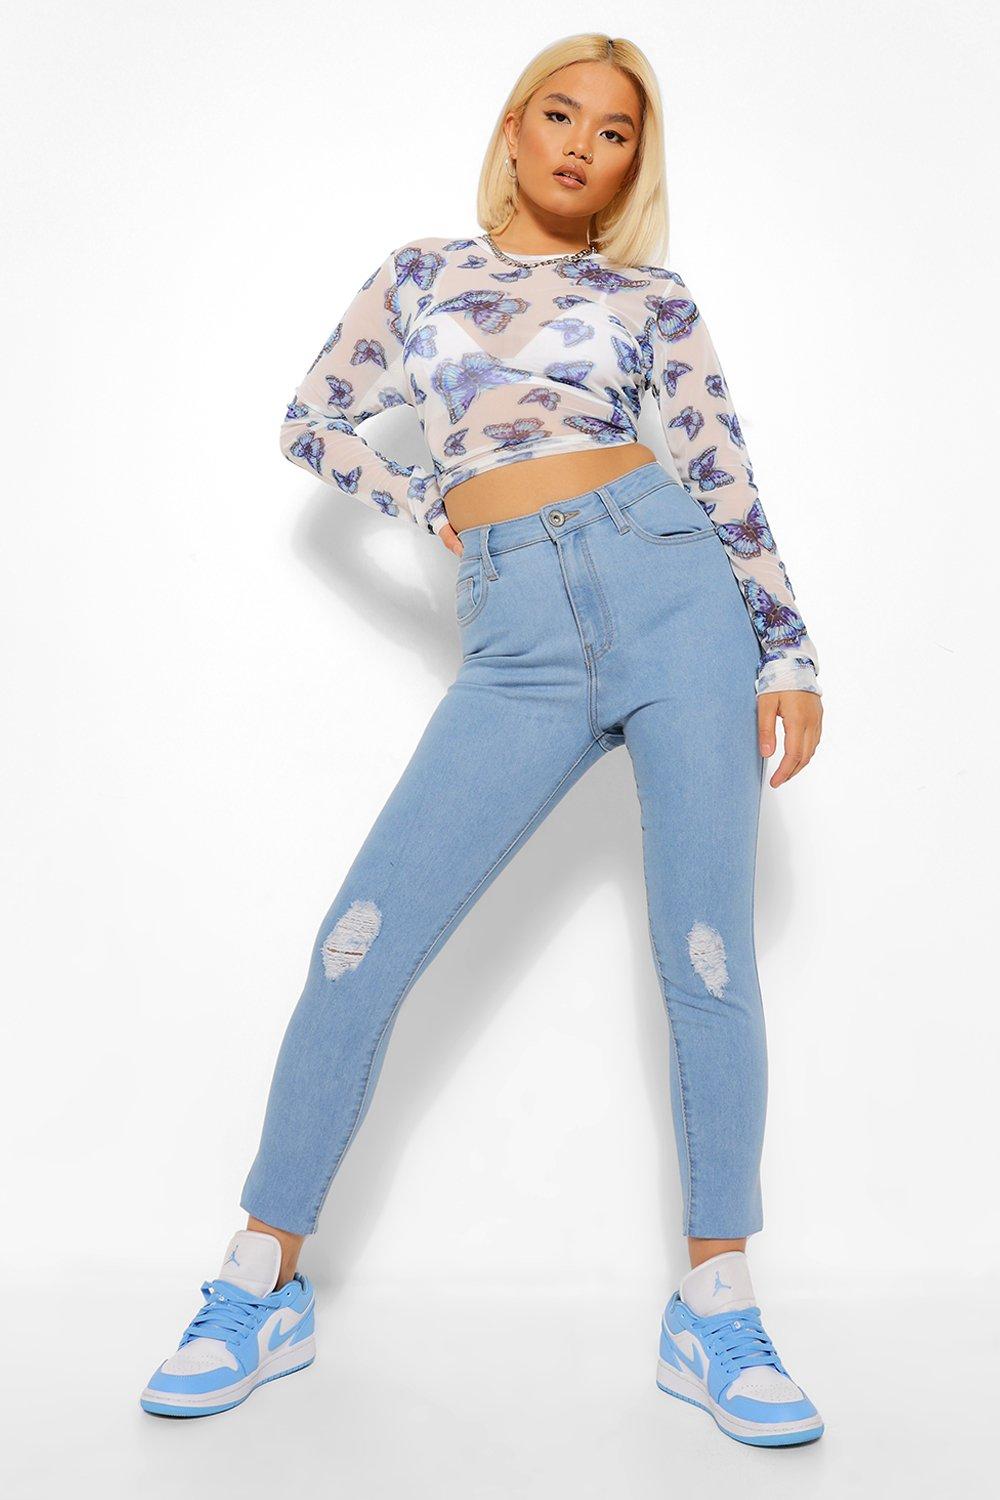 Ripped Jeans For Women Distressed Jeans Boohoo Uk